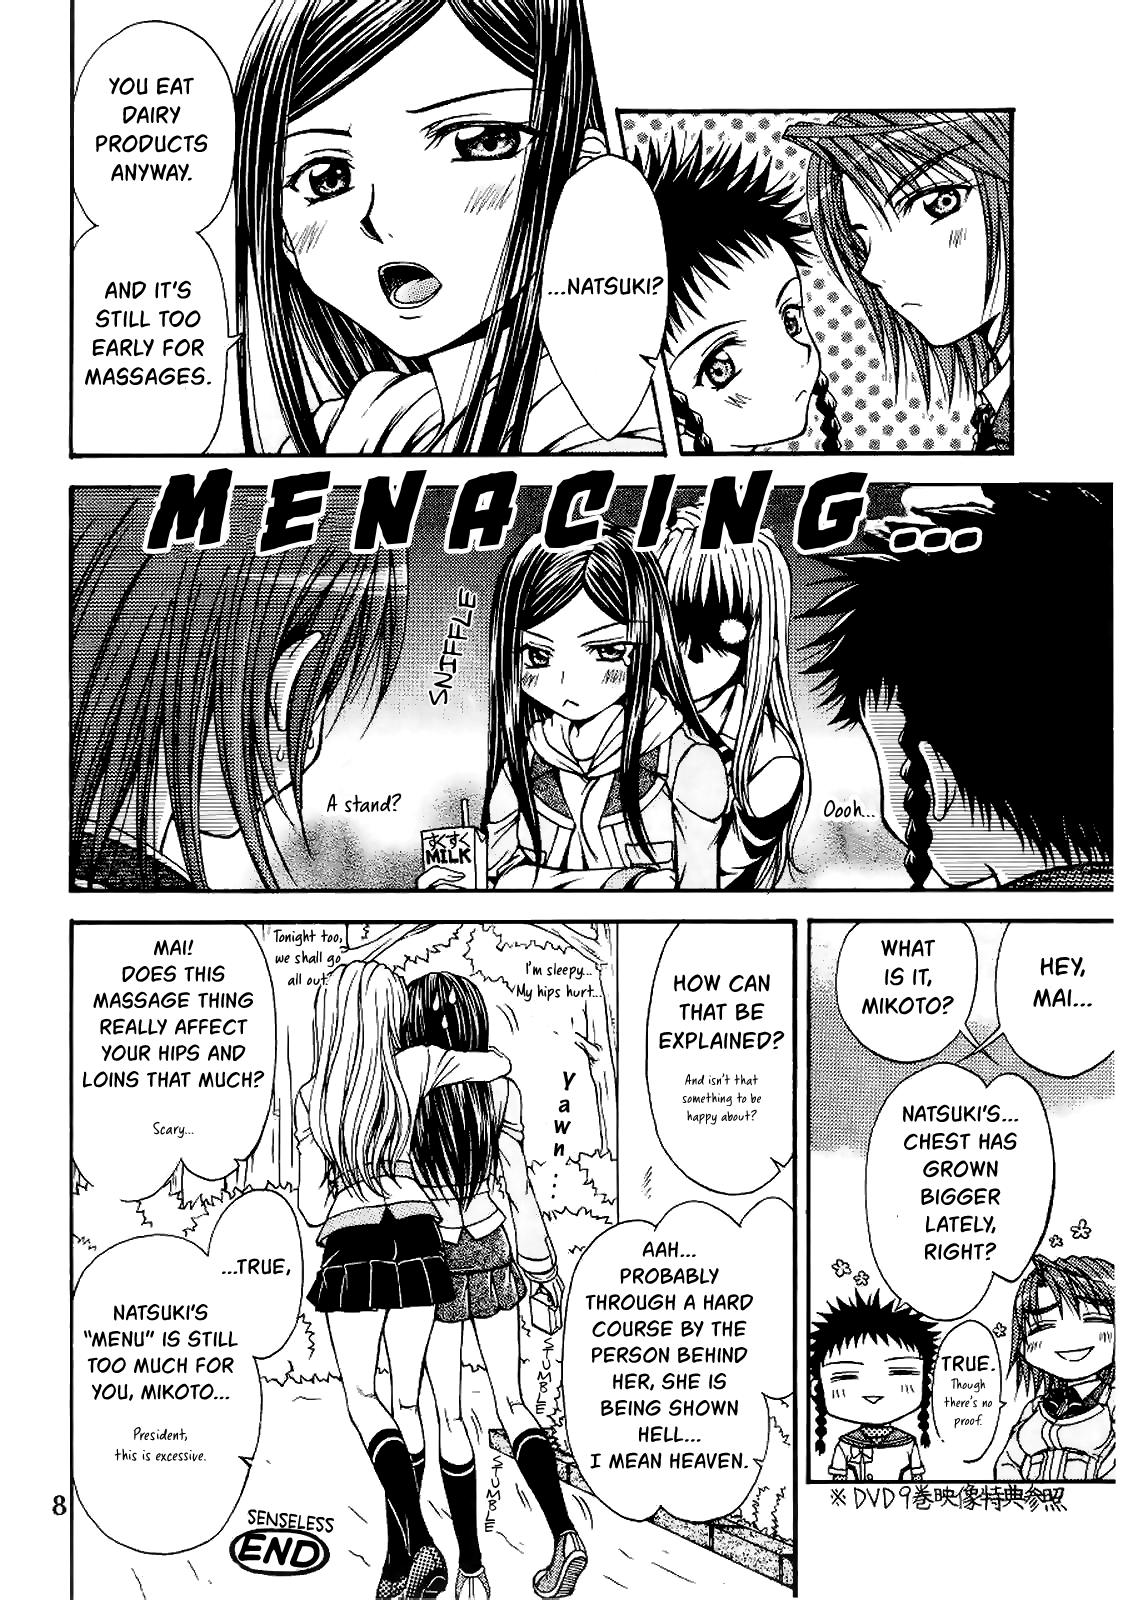 First After School Dolce - Mai-hime Studs - Page 8